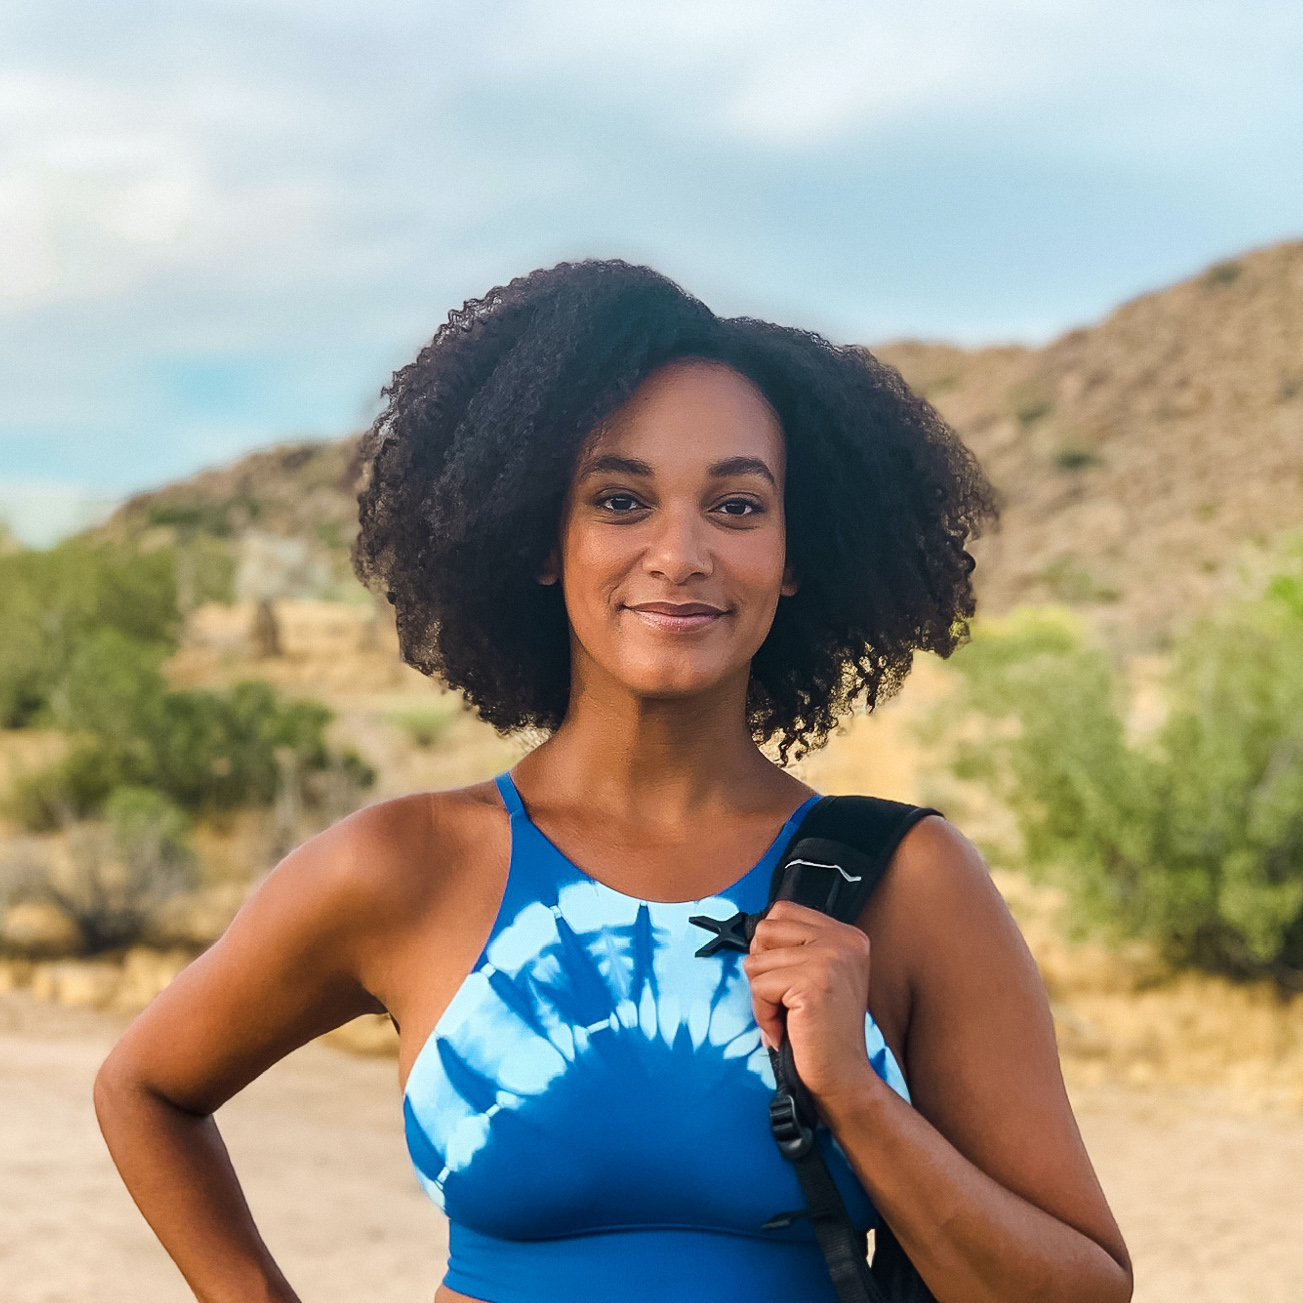 Black Hiker getting outdoors in Joshua Tree National Park holding a backpack, hand on her hip, wearing an afro